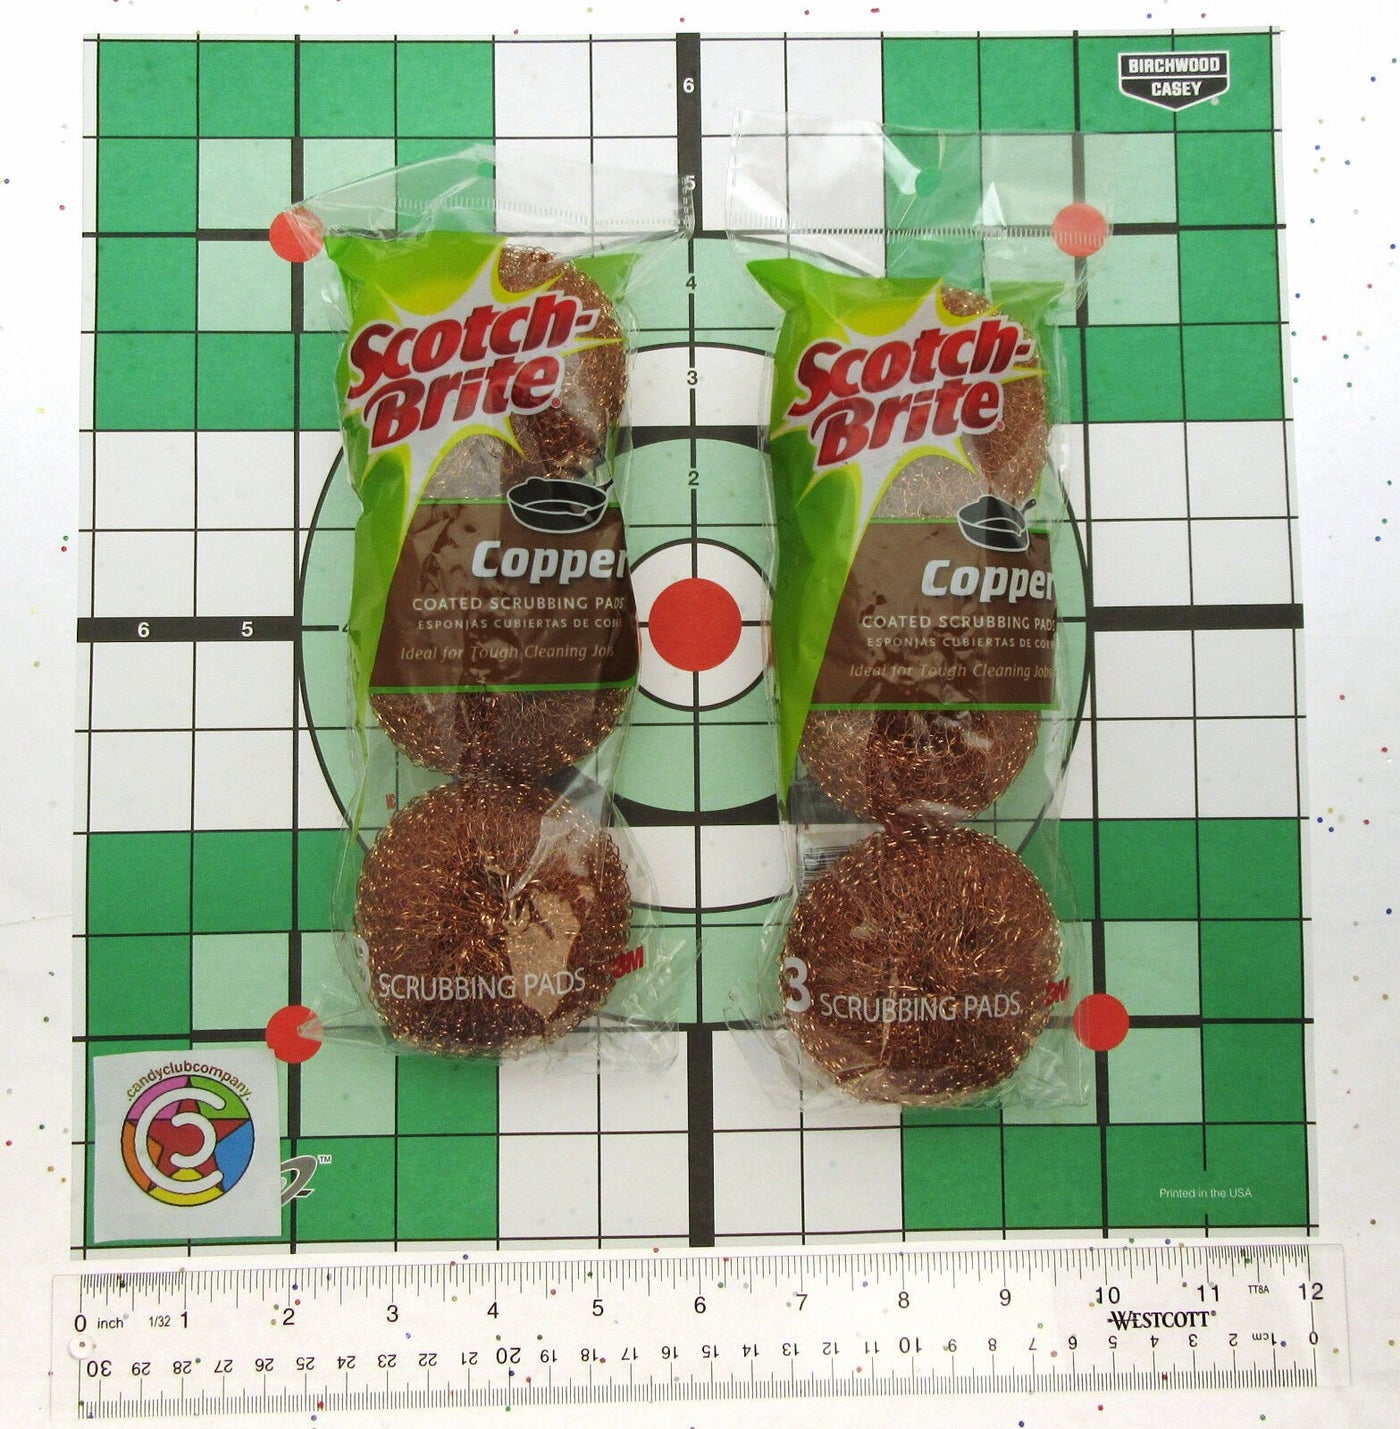 Scotch Brite Copper Coated Scrubber Pads ~ Pots Pans Grill and More ~ Lot of 2